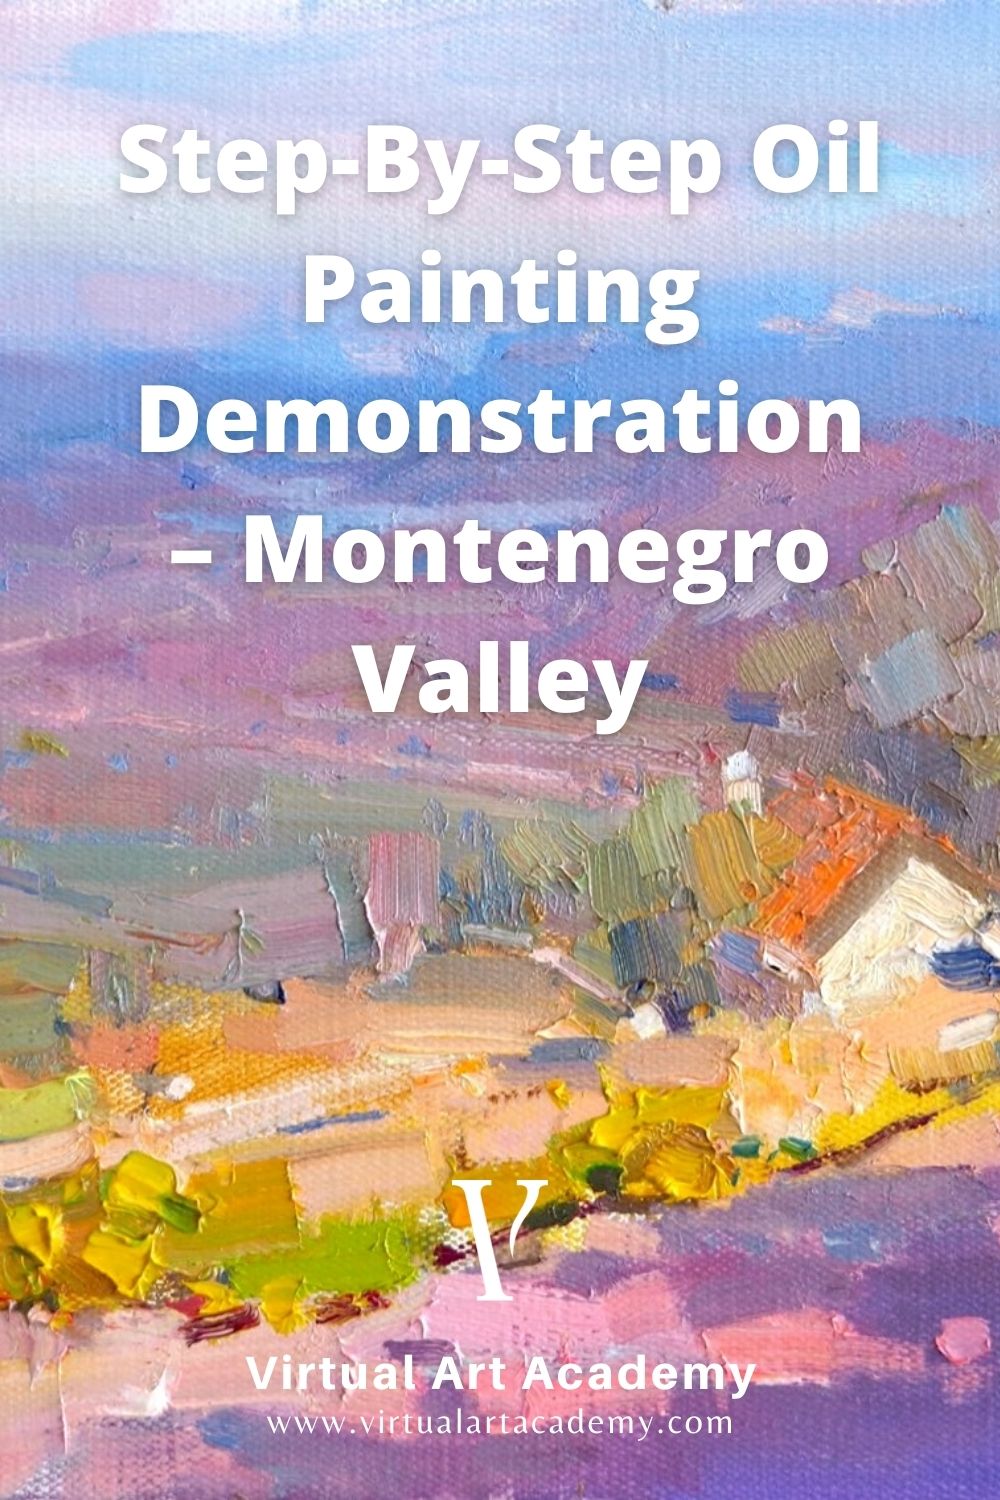 Step-By-Step Oil Painting Demonstration – Montenegro Valley